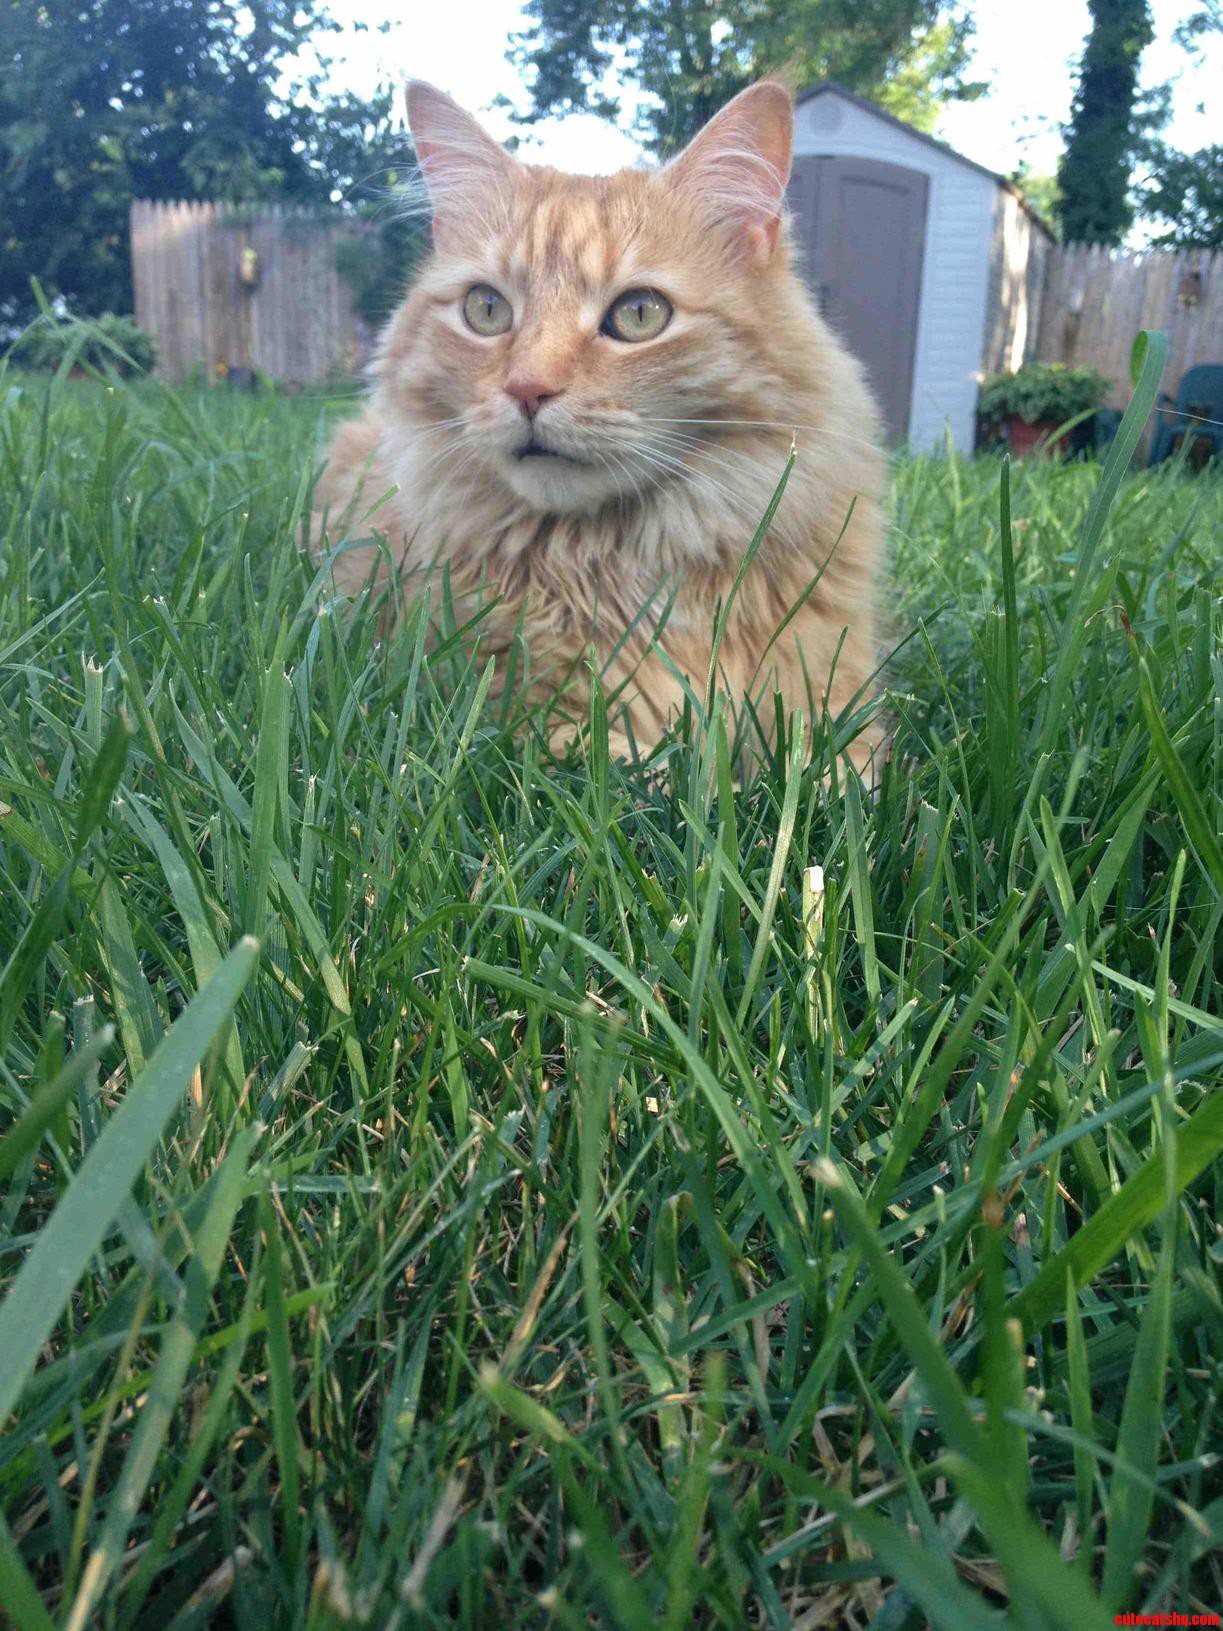 Seamus Likes Laying In Grass.